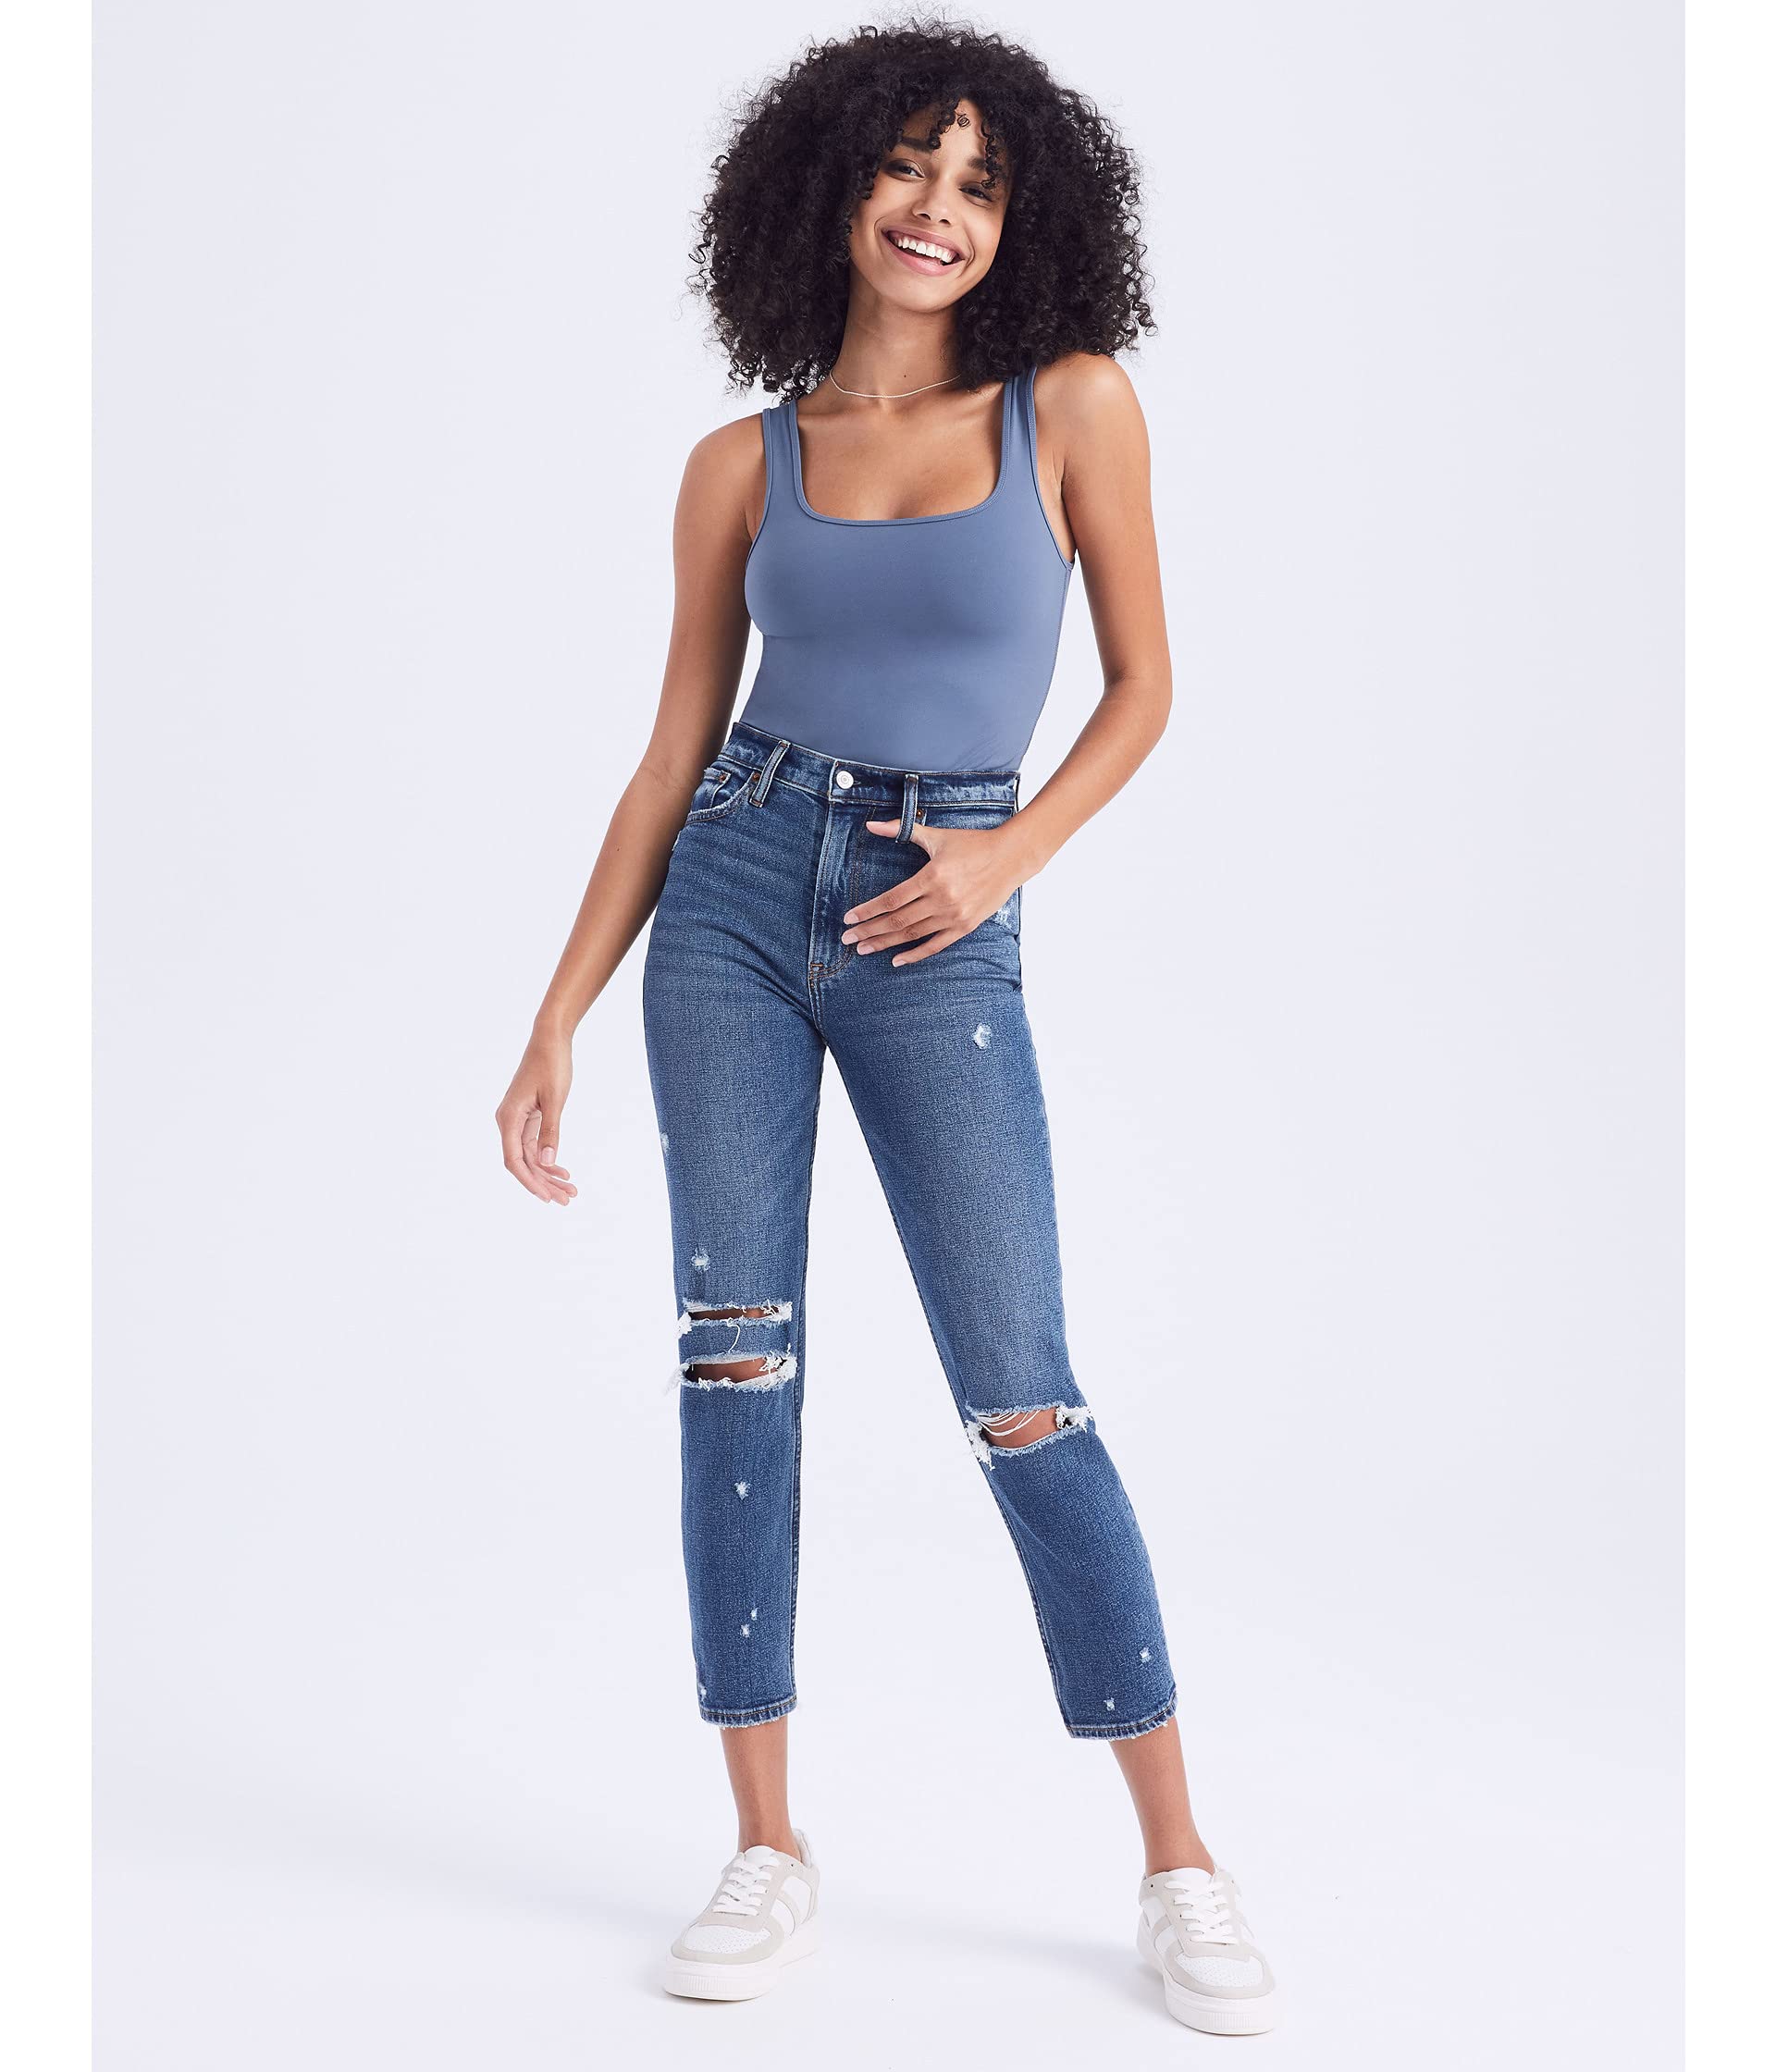 Abercrombie mom jeans, when it comes to choosing the perfect pair of Abercrombie mom jeans, there are several factors